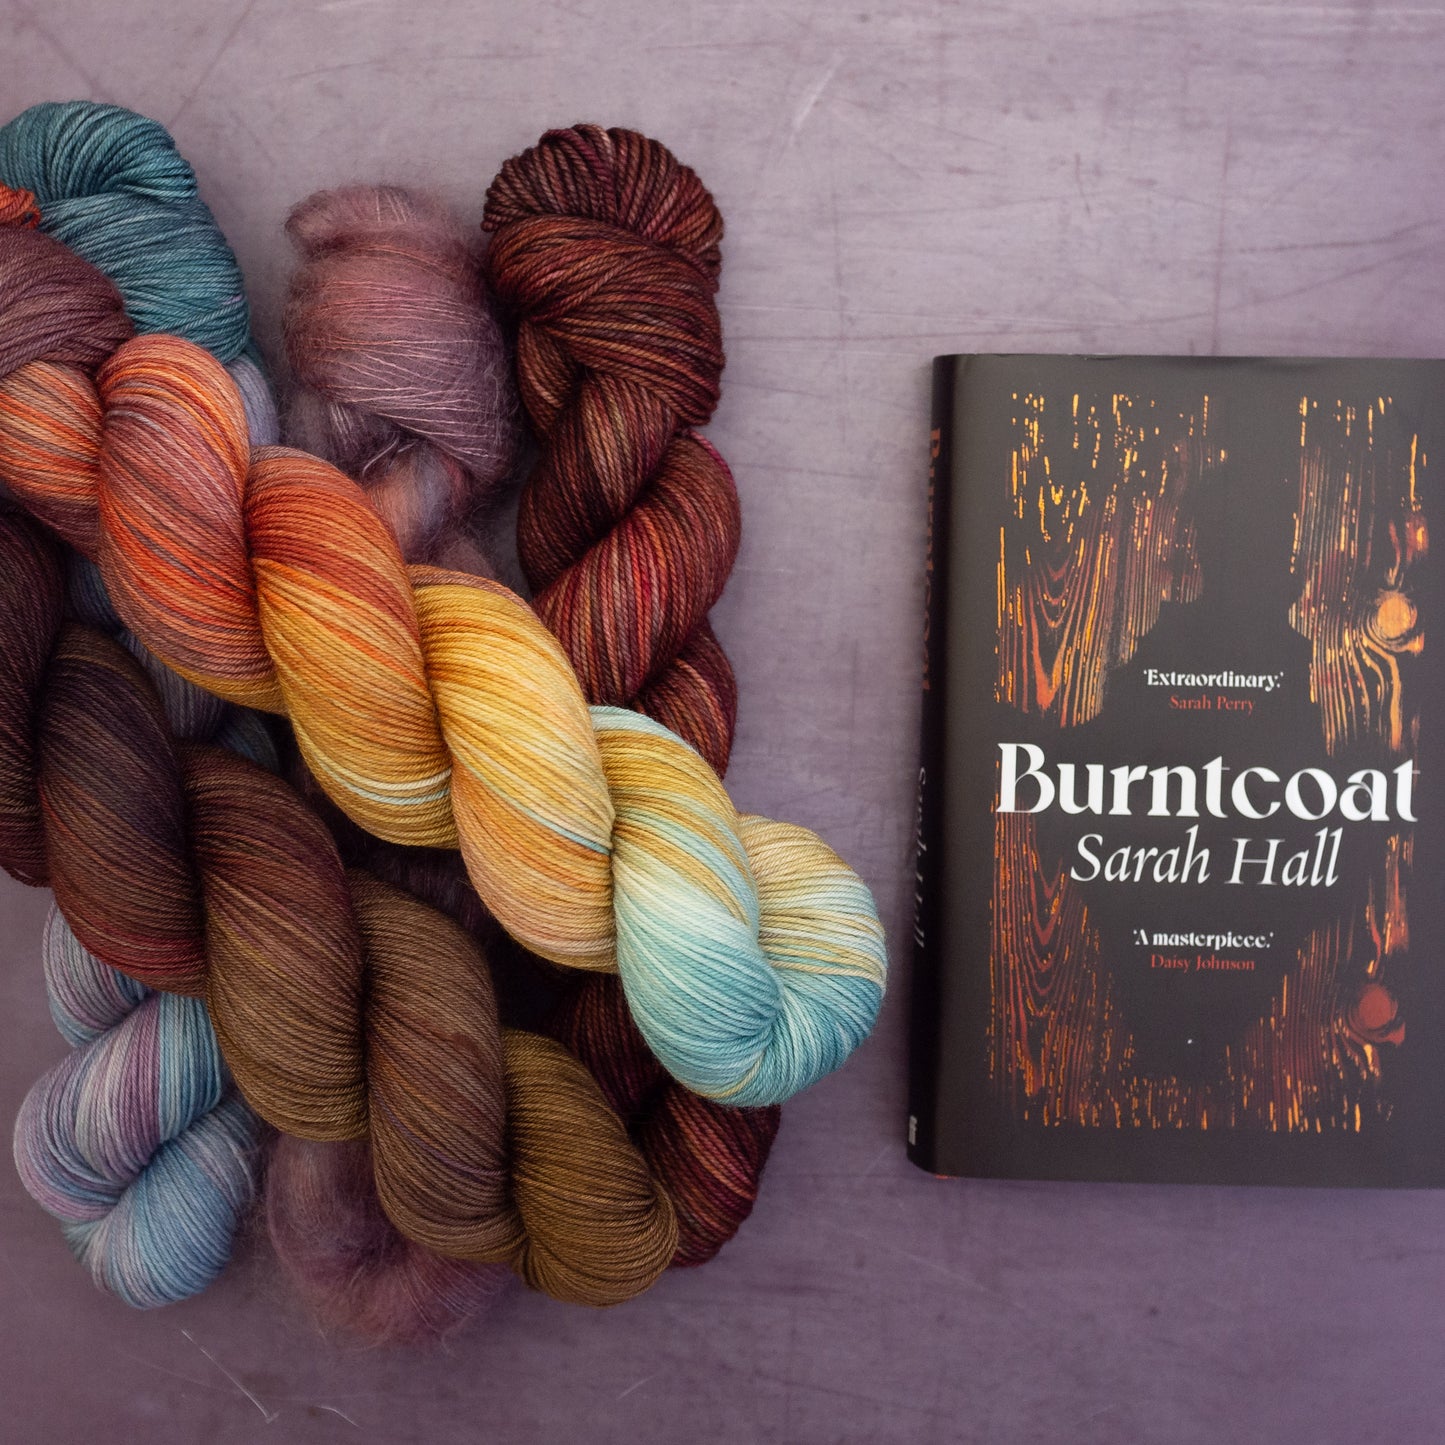 'currently reading' : Burntcoat by Sarah Hall